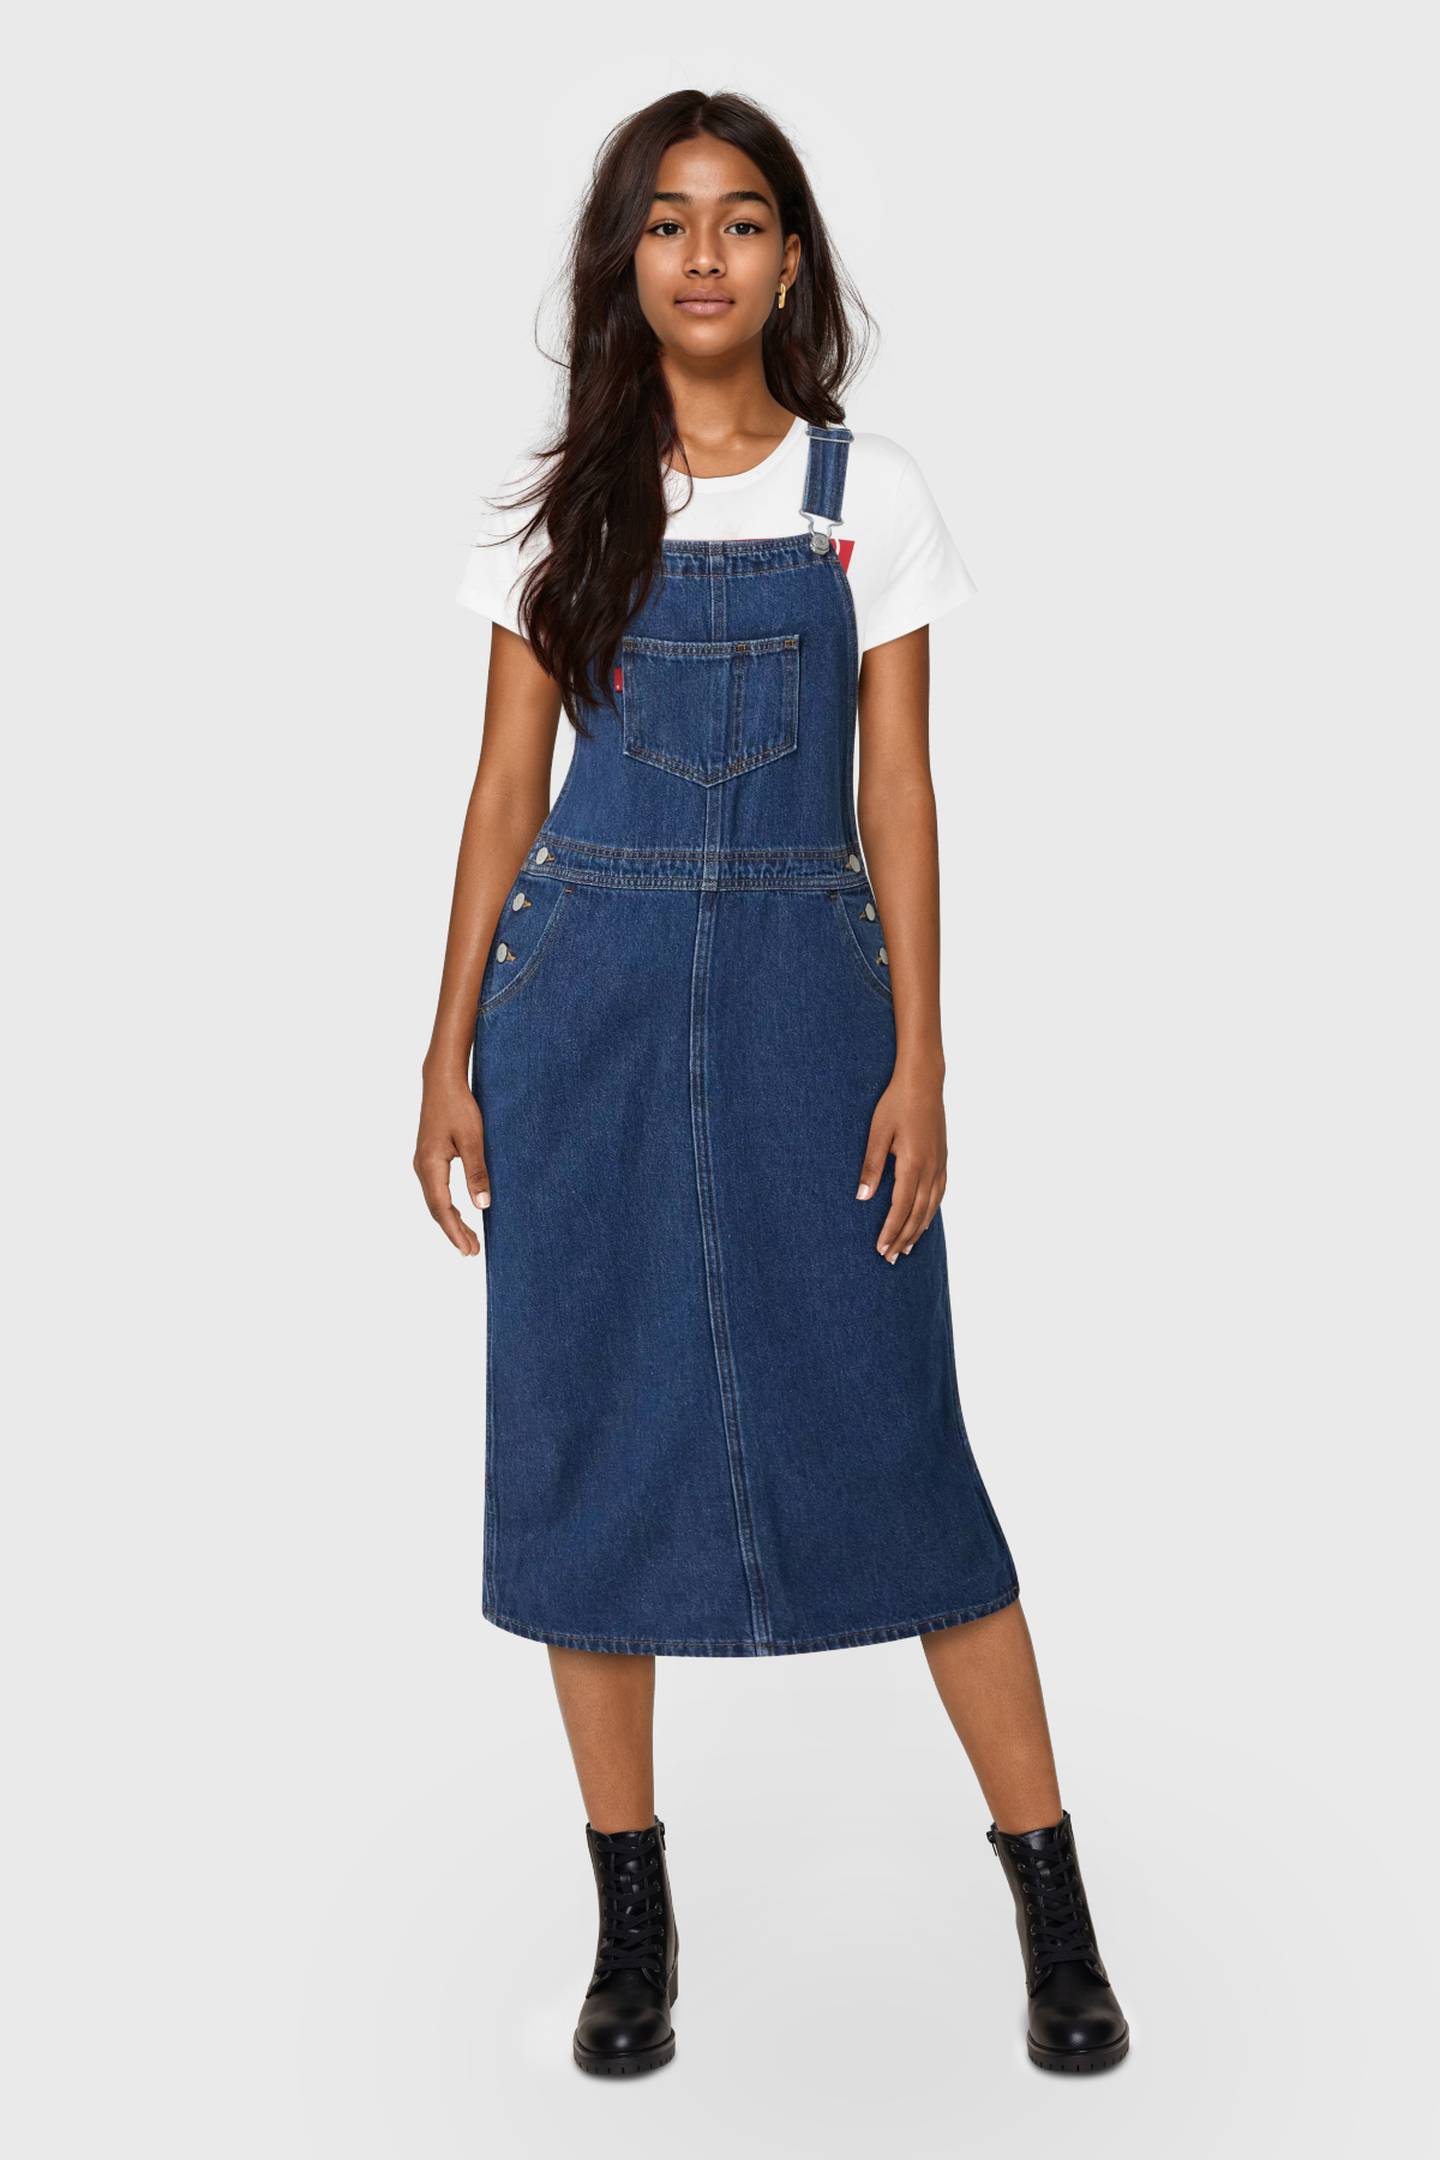 A realistic-looking young female model wears Levi's overalls and looks into the camera.